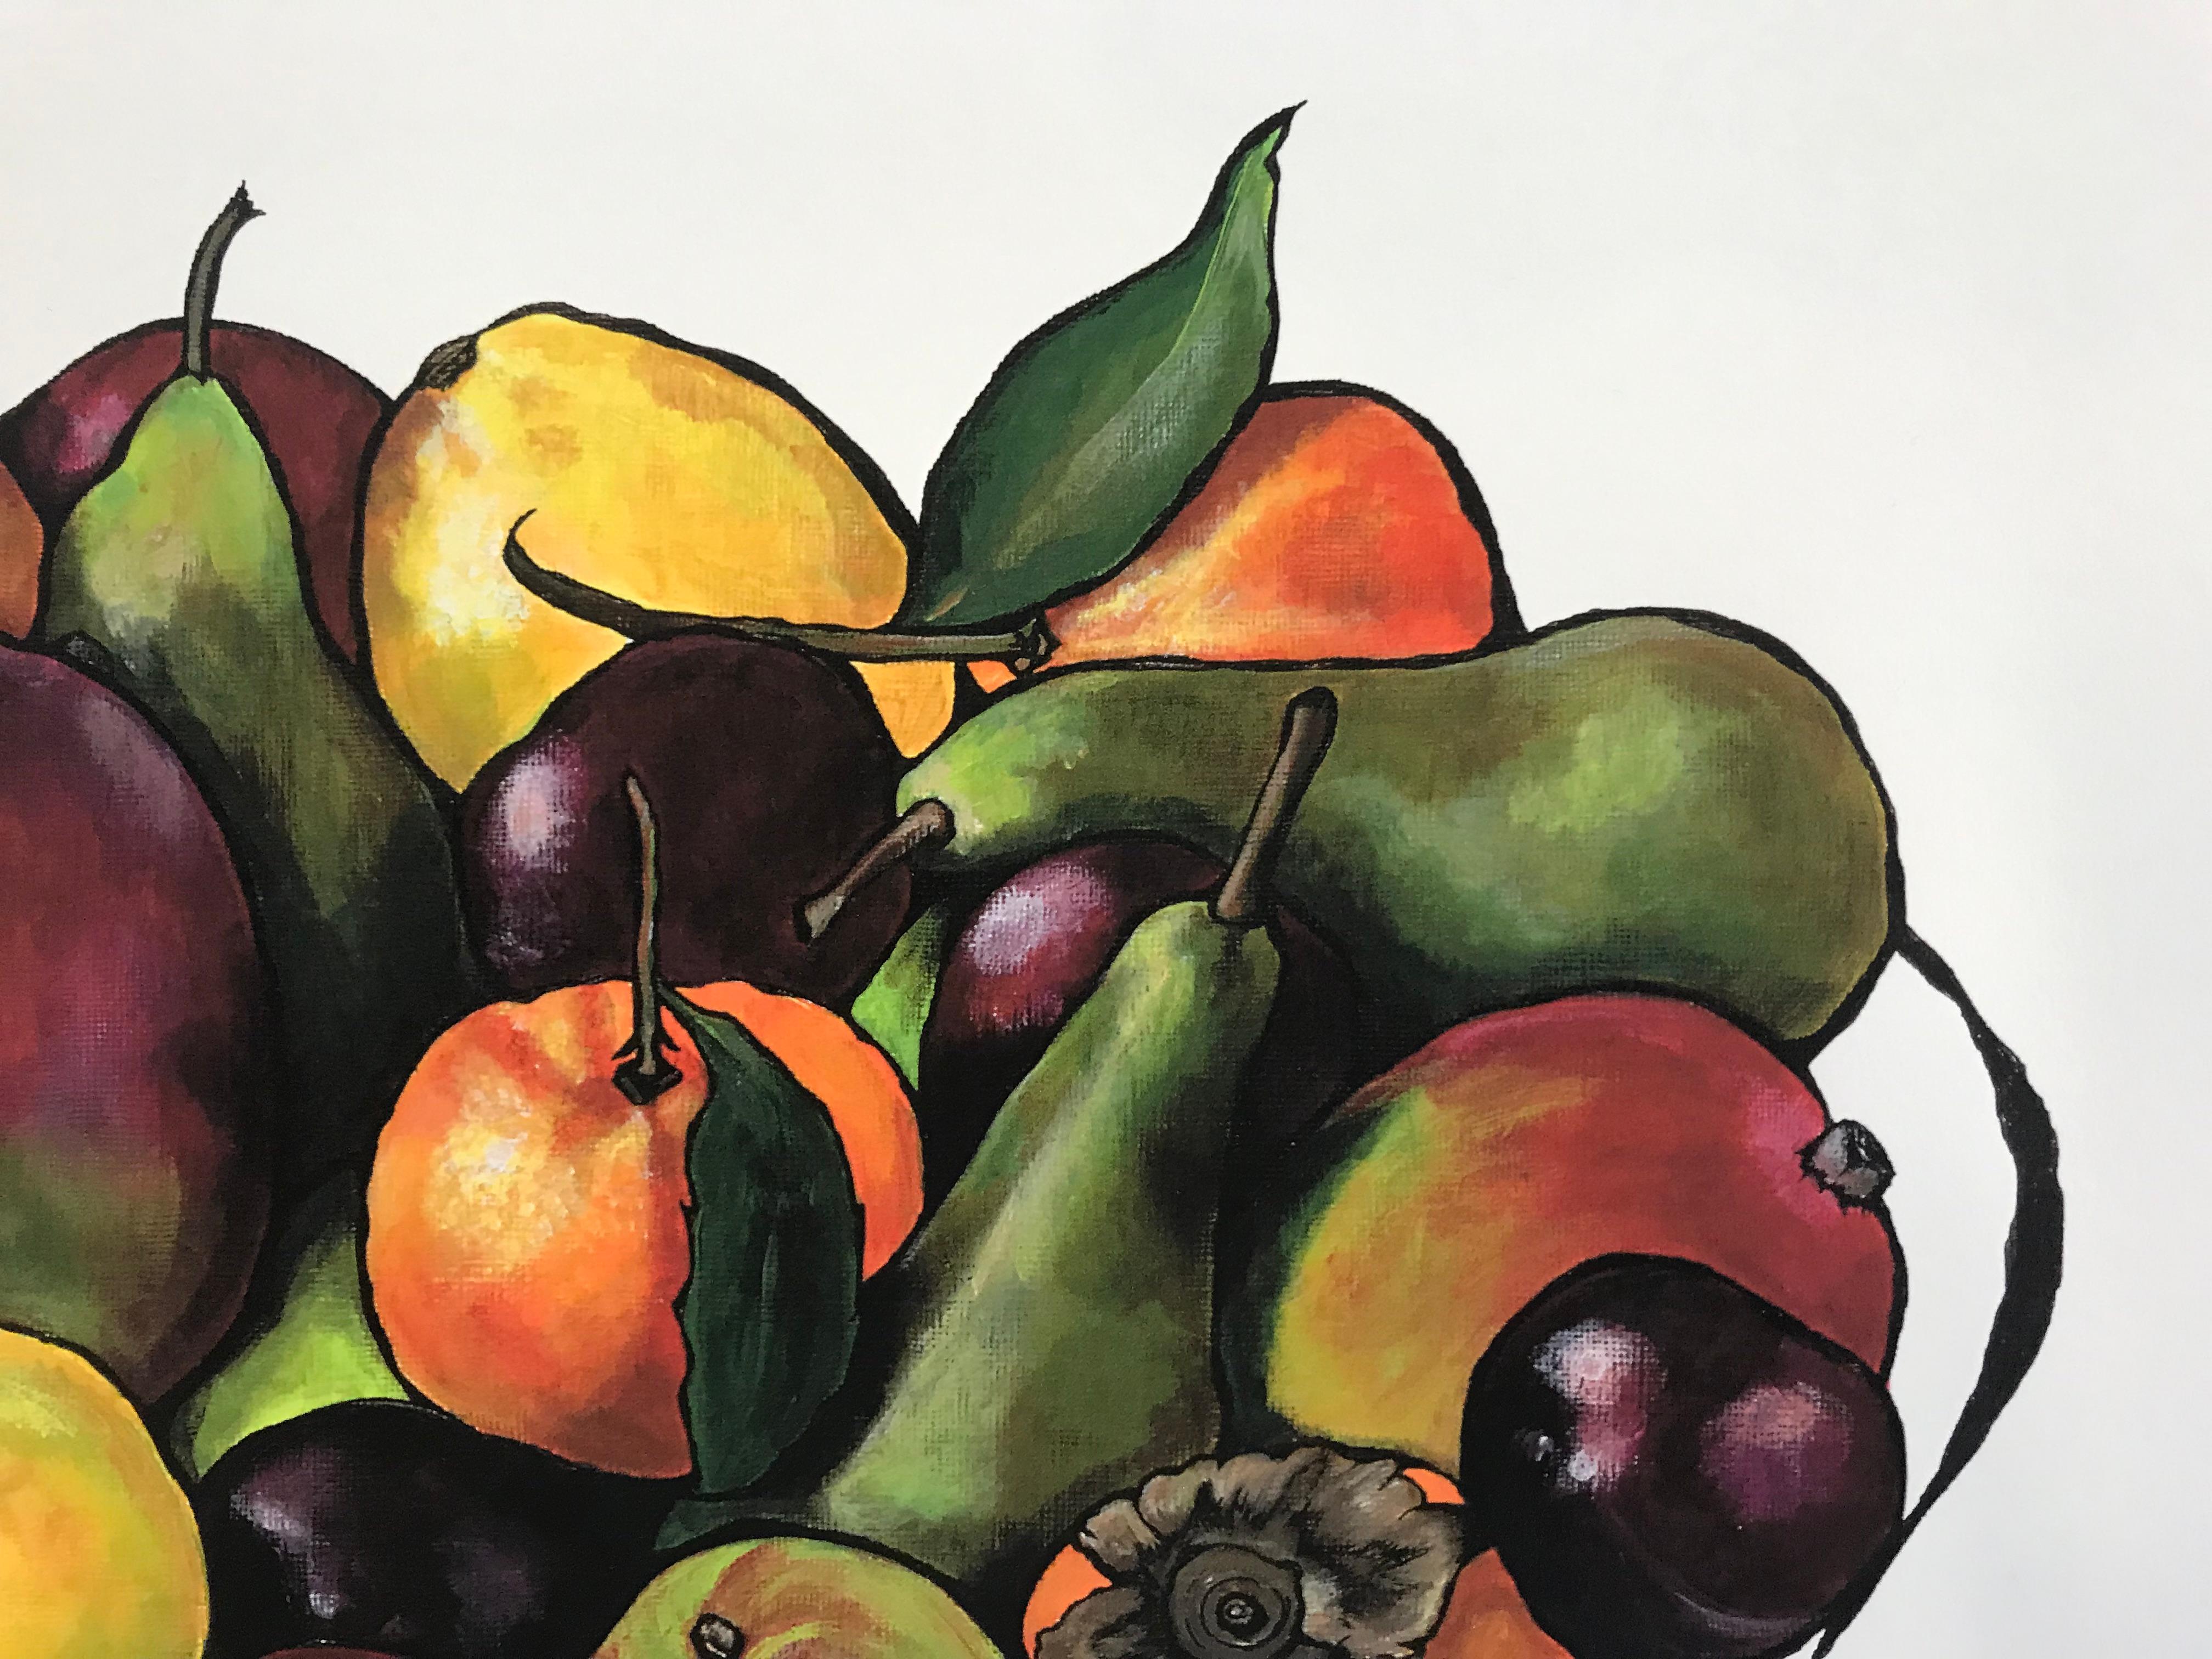 A colourful bowl of fruit against a white background. A giclée print of Lucy Routh's original painting.

Bold, bright and fresh with a sense of space and simplicity. This is  Lucy Routh comments 